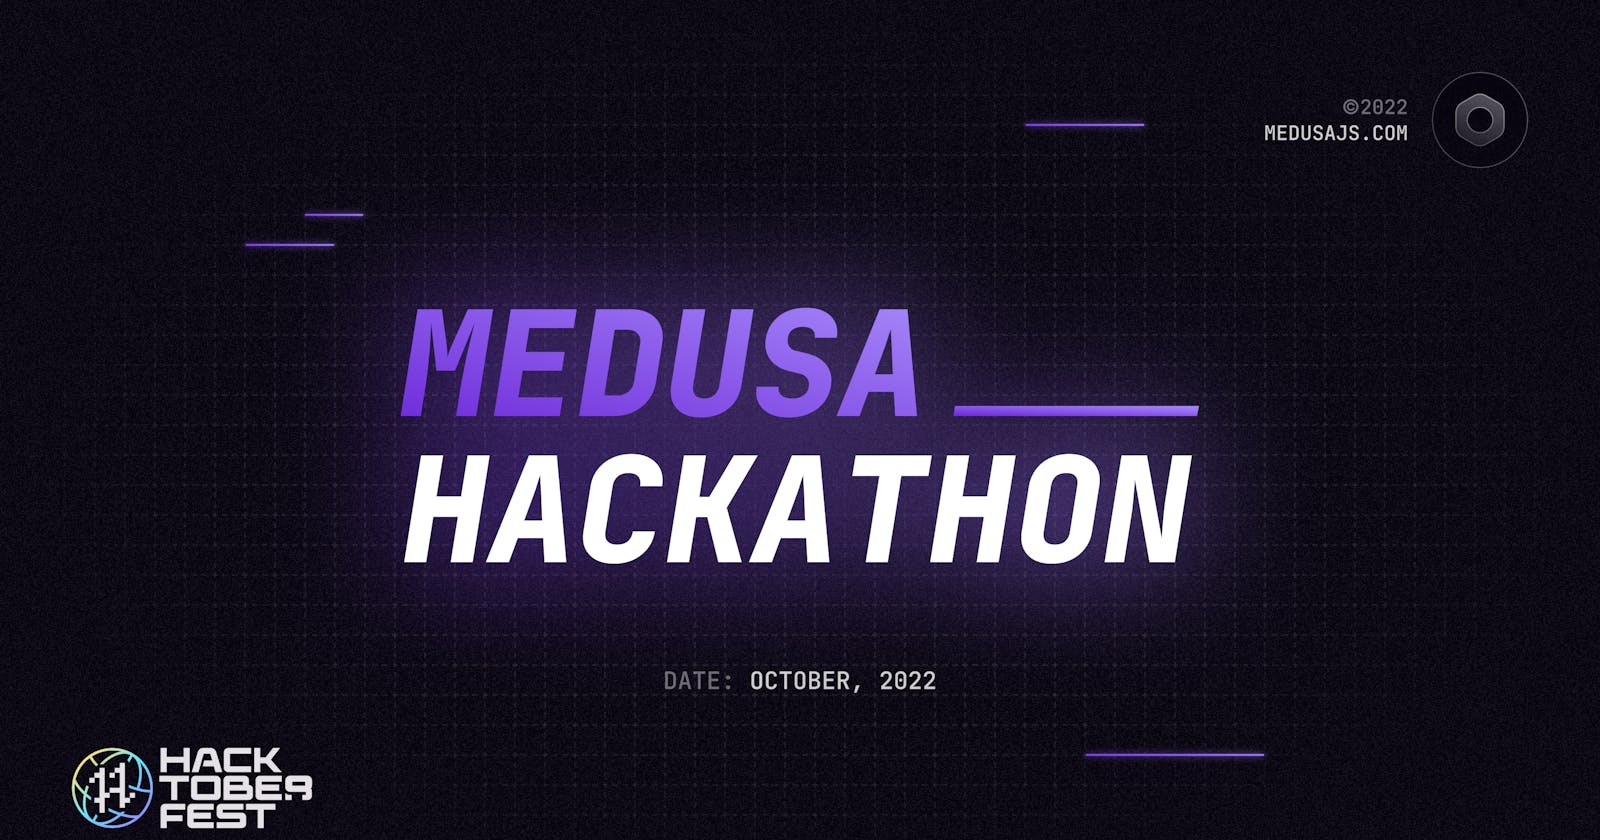 Hacktoberfest Hackathon with Medusa: Win $1,500 and Cool Merch